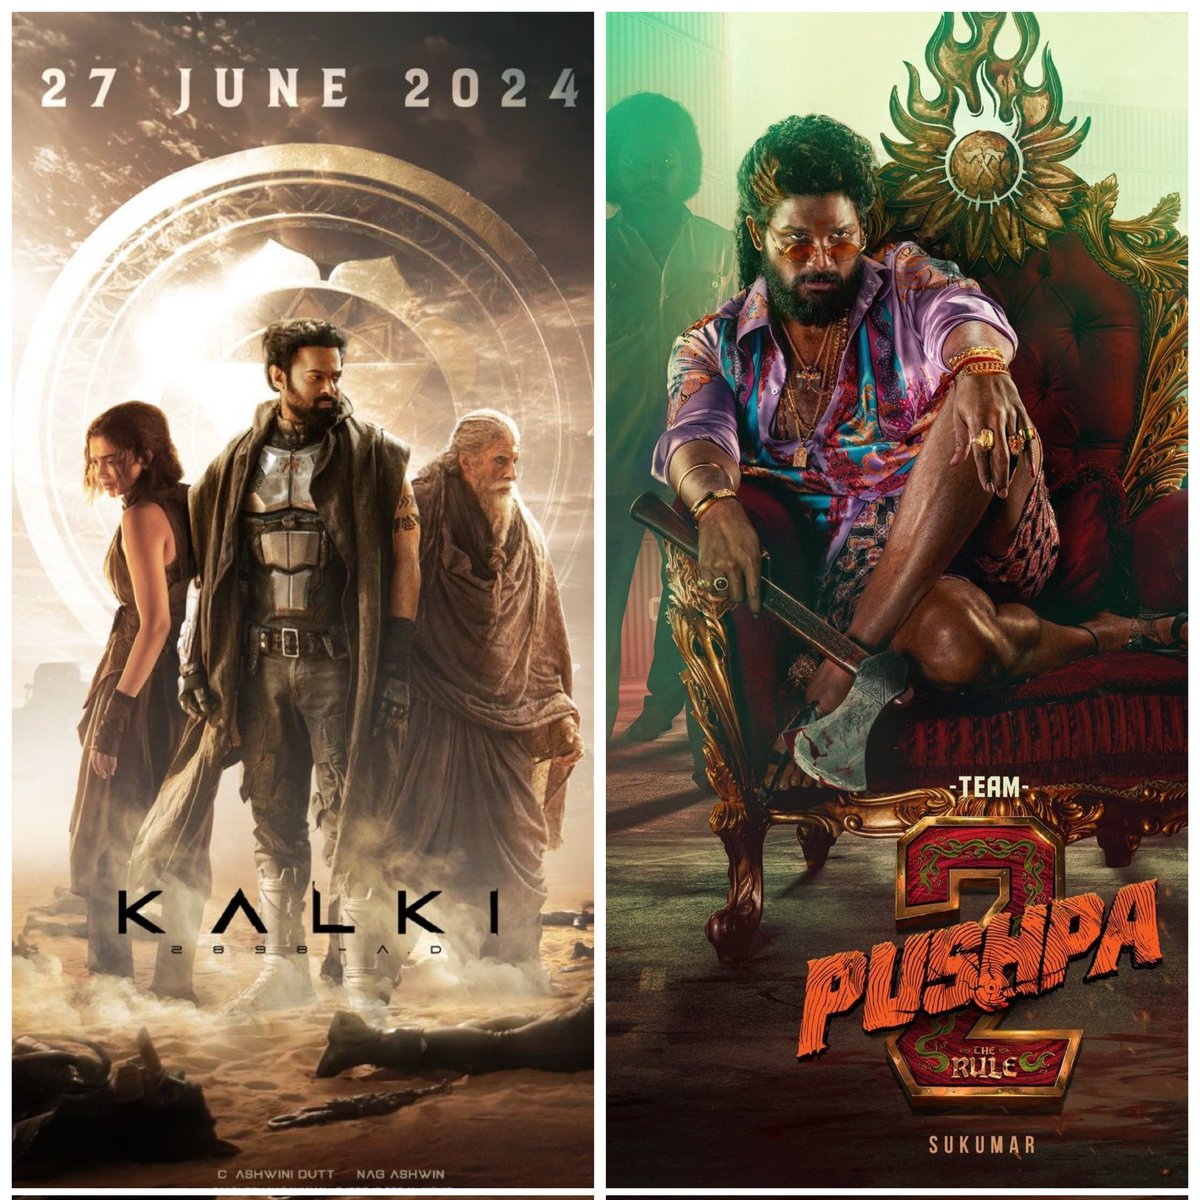 Which film will take a Bigger Opening? #Kalki2898AD OR #Pushpa2TheRule